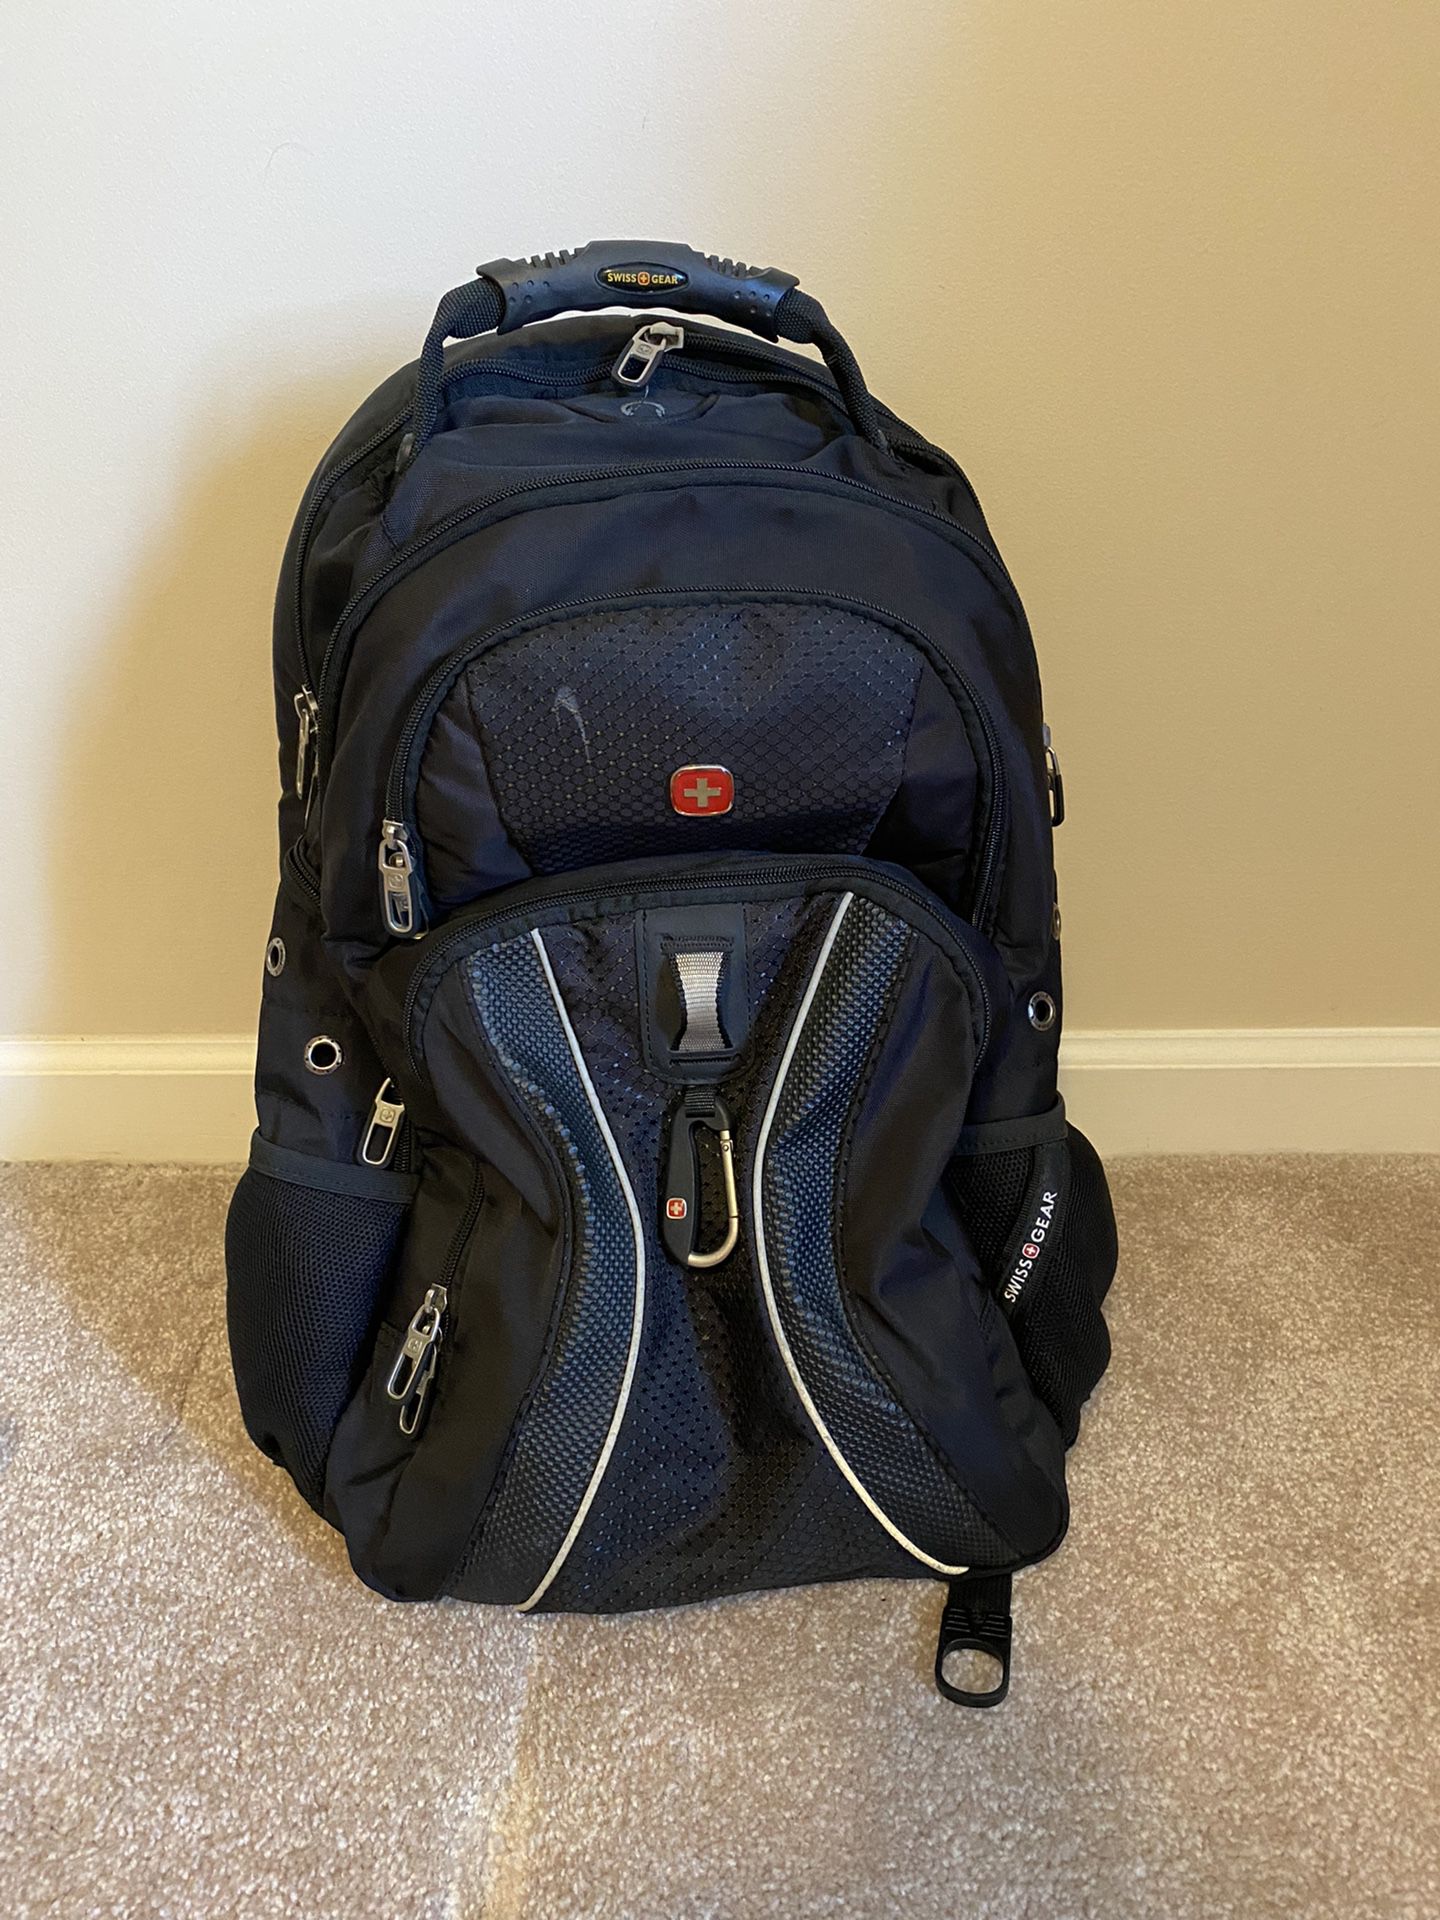 Swiss Gear backpack In Great Condition 